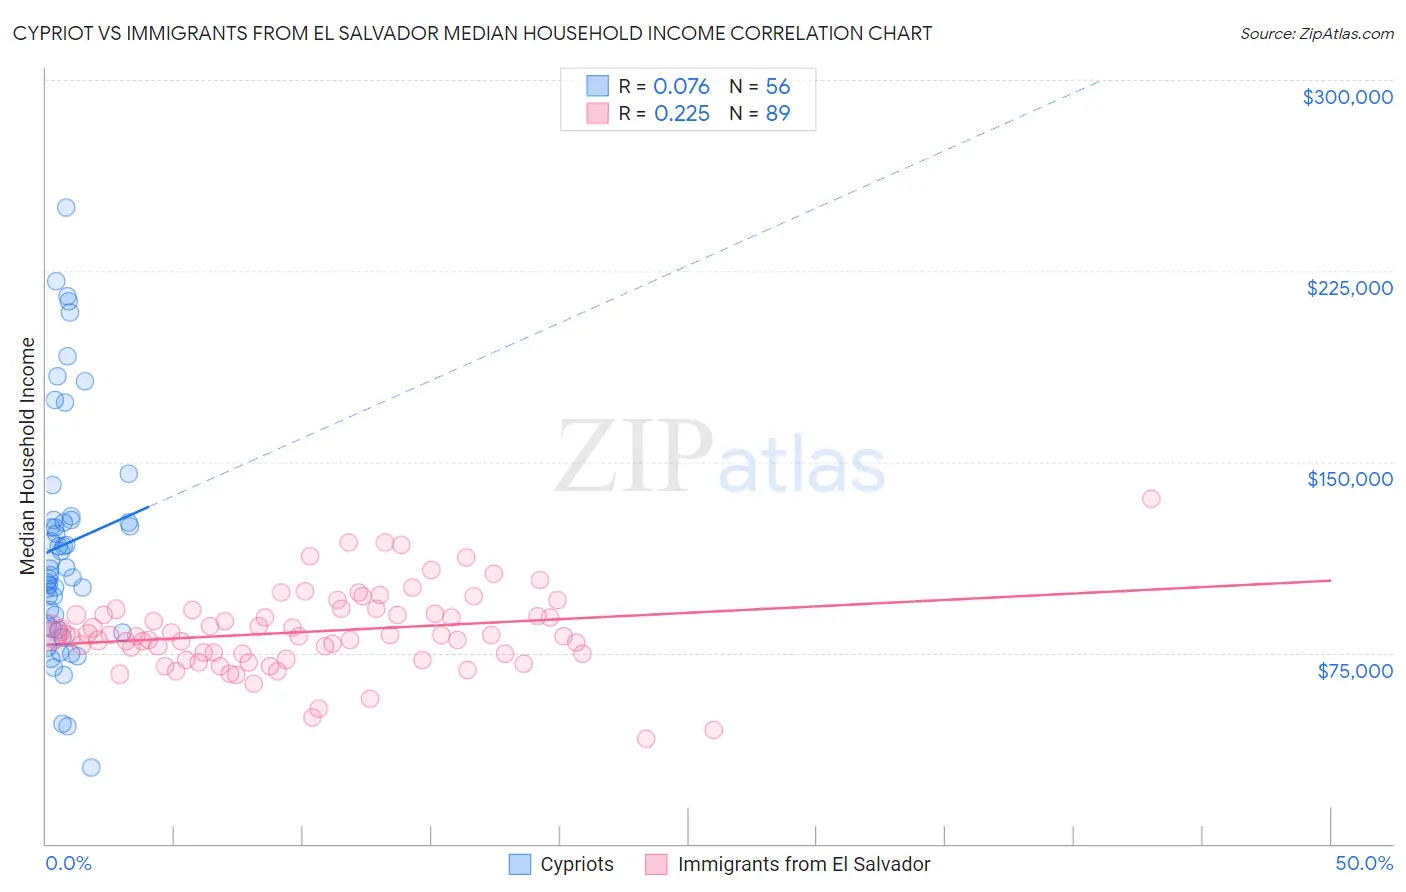 Cypriot vs Immigrants from El Salvador Median Household Income